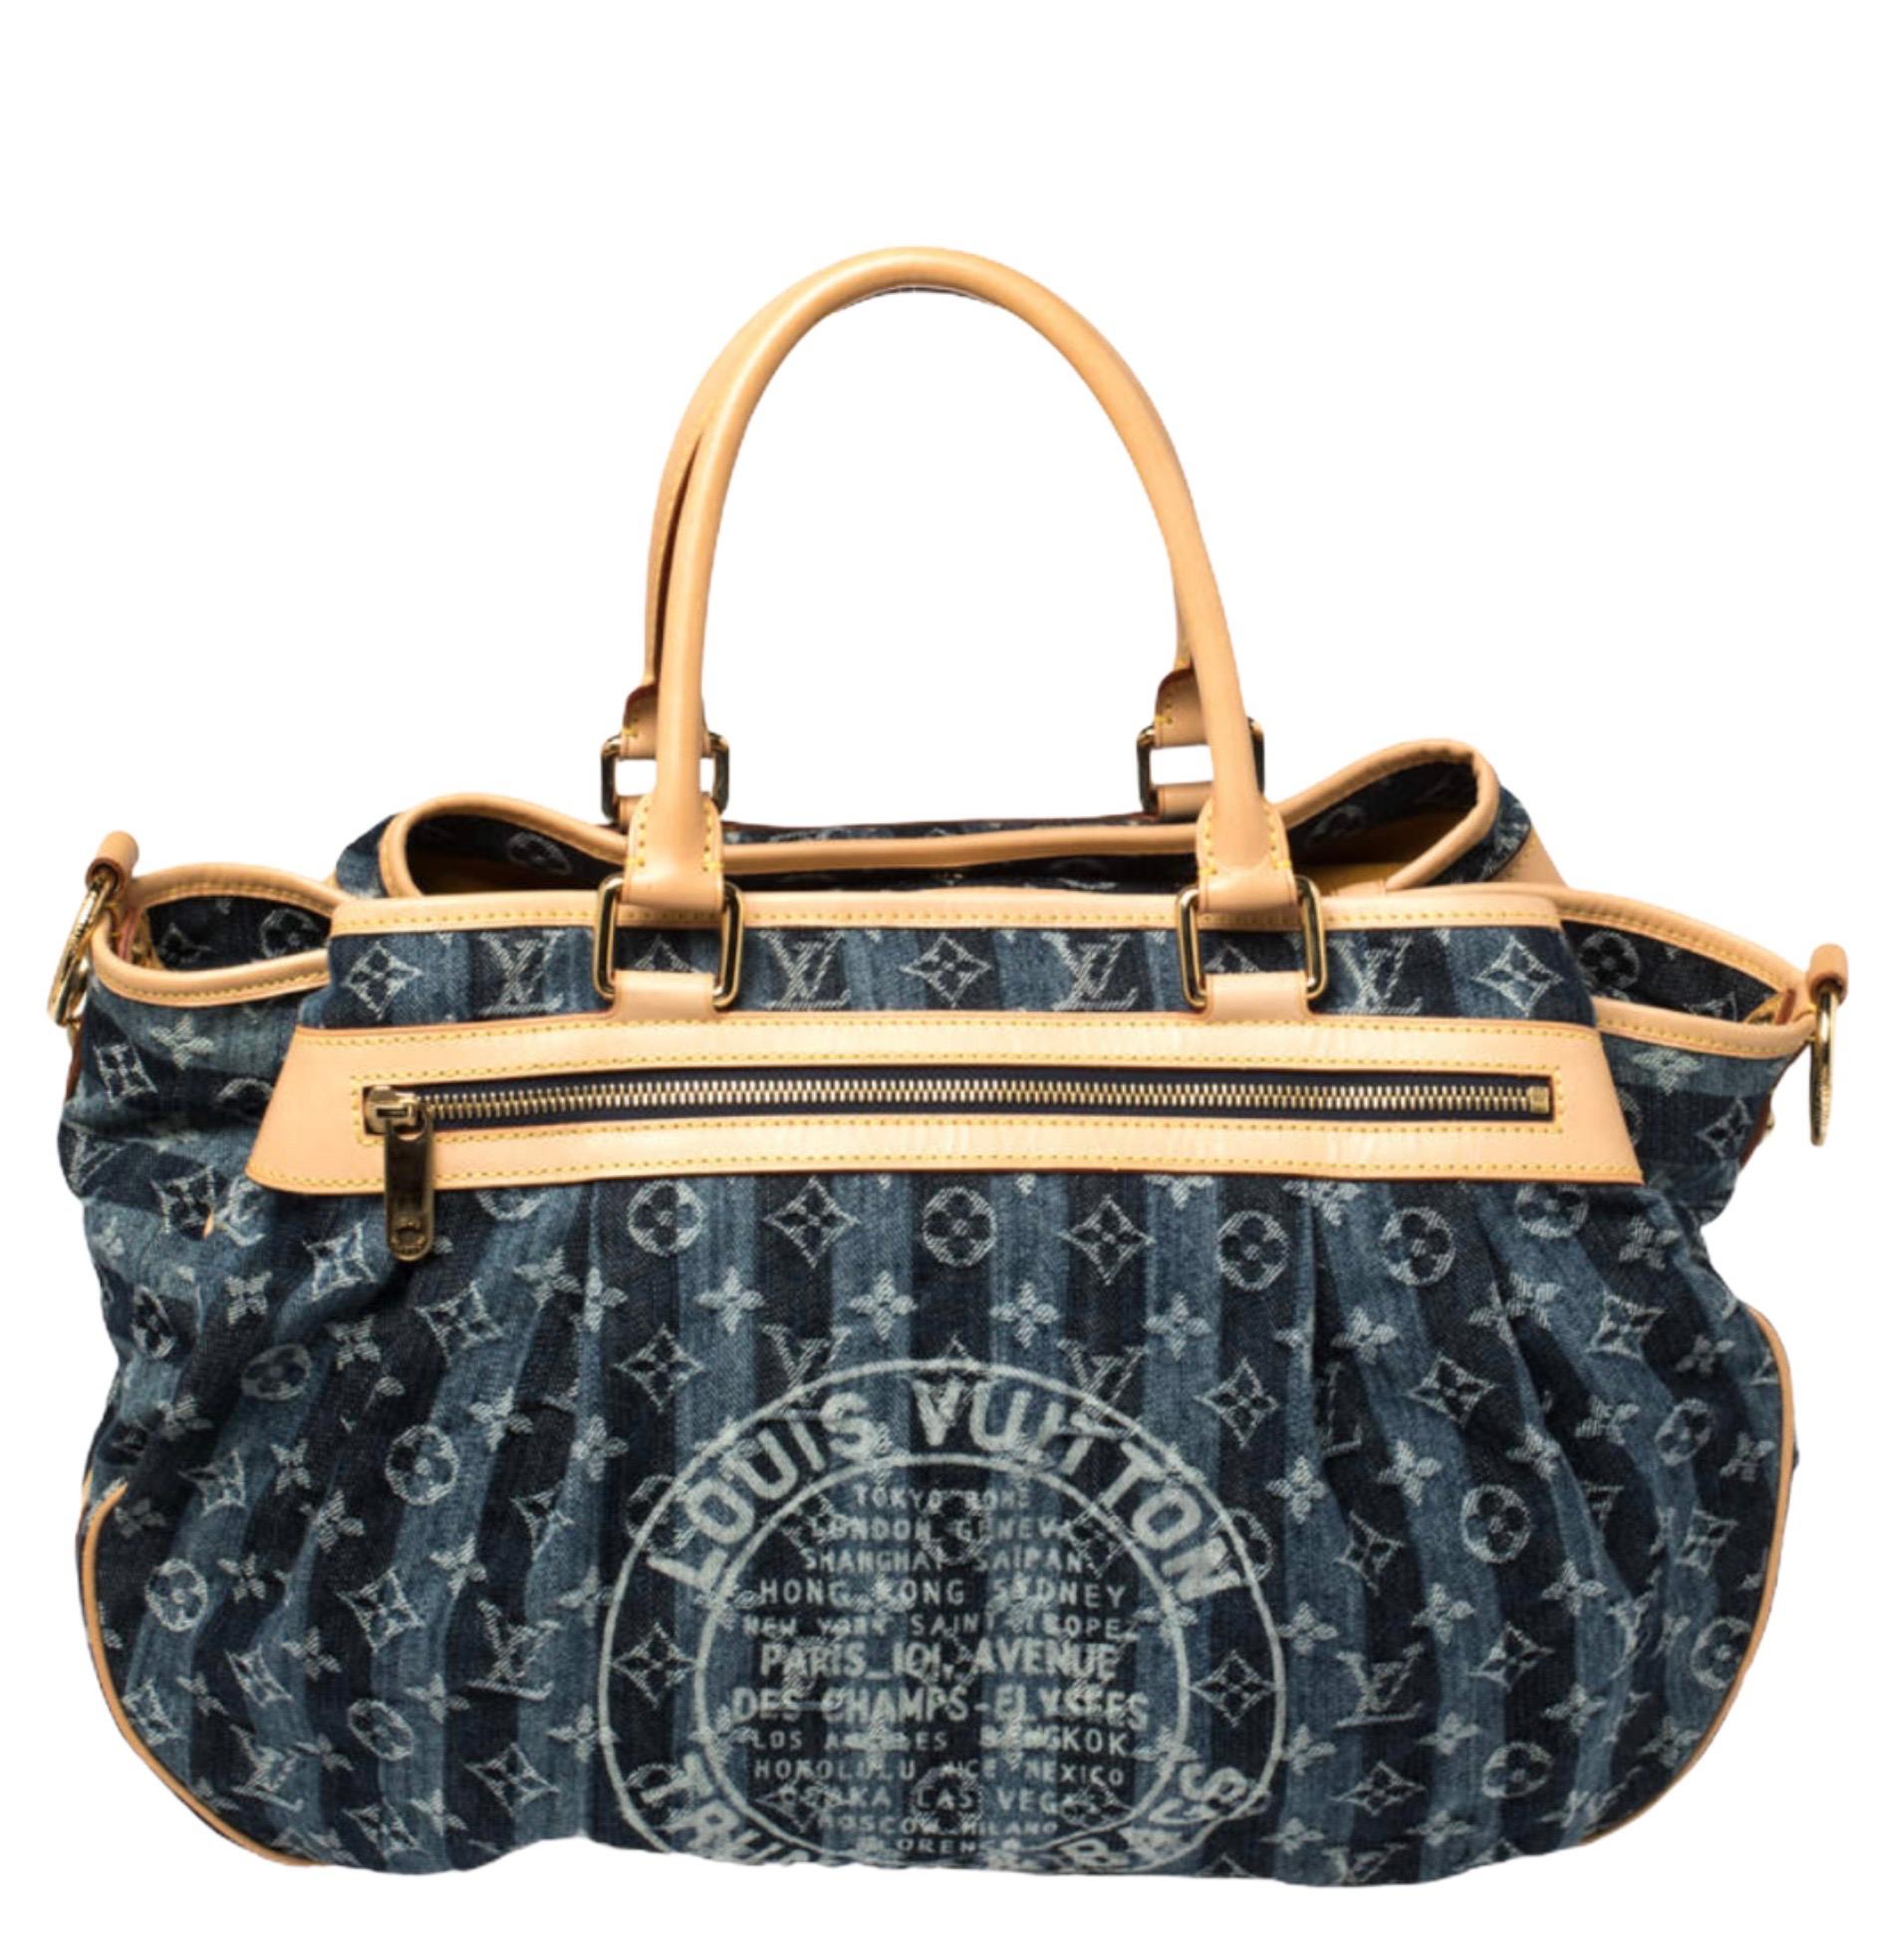 LIMITED EDITION - A rare gem by Louis Vuitton designed by Marc Jacobs
Indigo blue distressed denim with the famous LV monogram 
